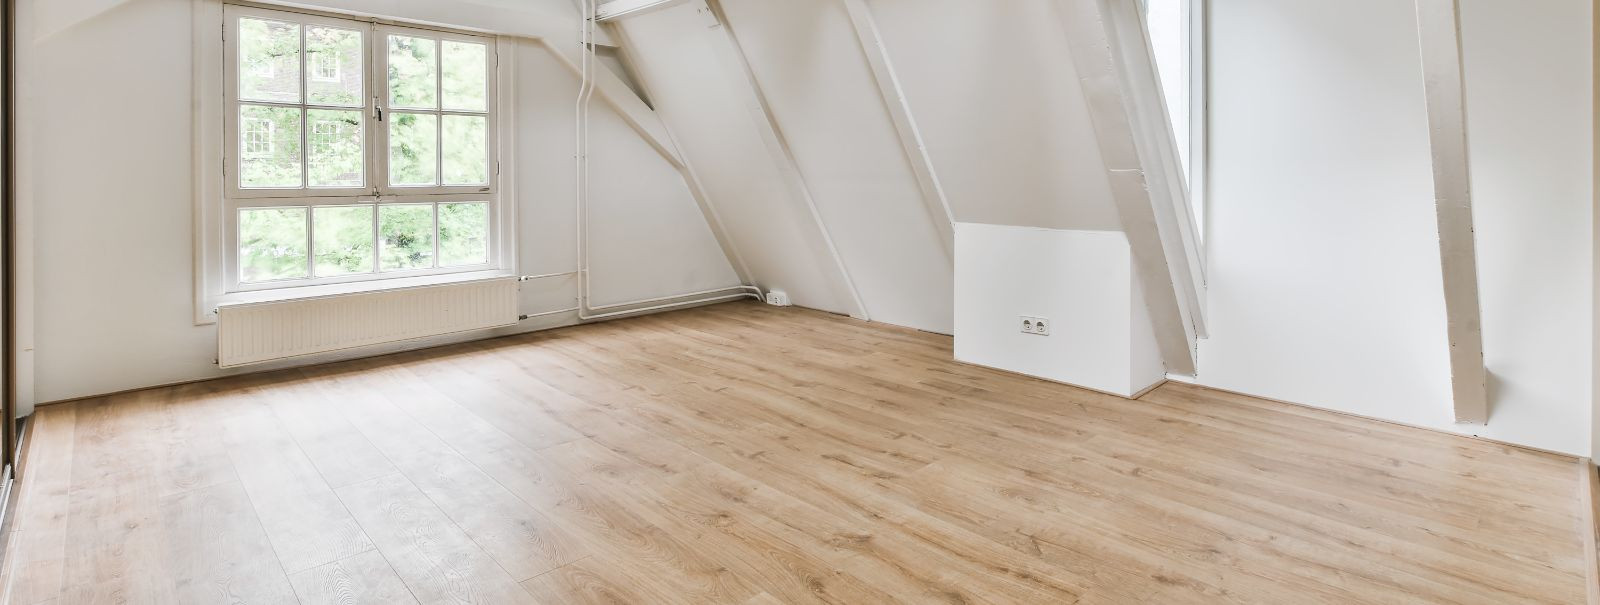 Hardwood floors are a timeless feature that add warmth and elegance to any space. However, they require proper care to maintain their beauty and longevity. Reco